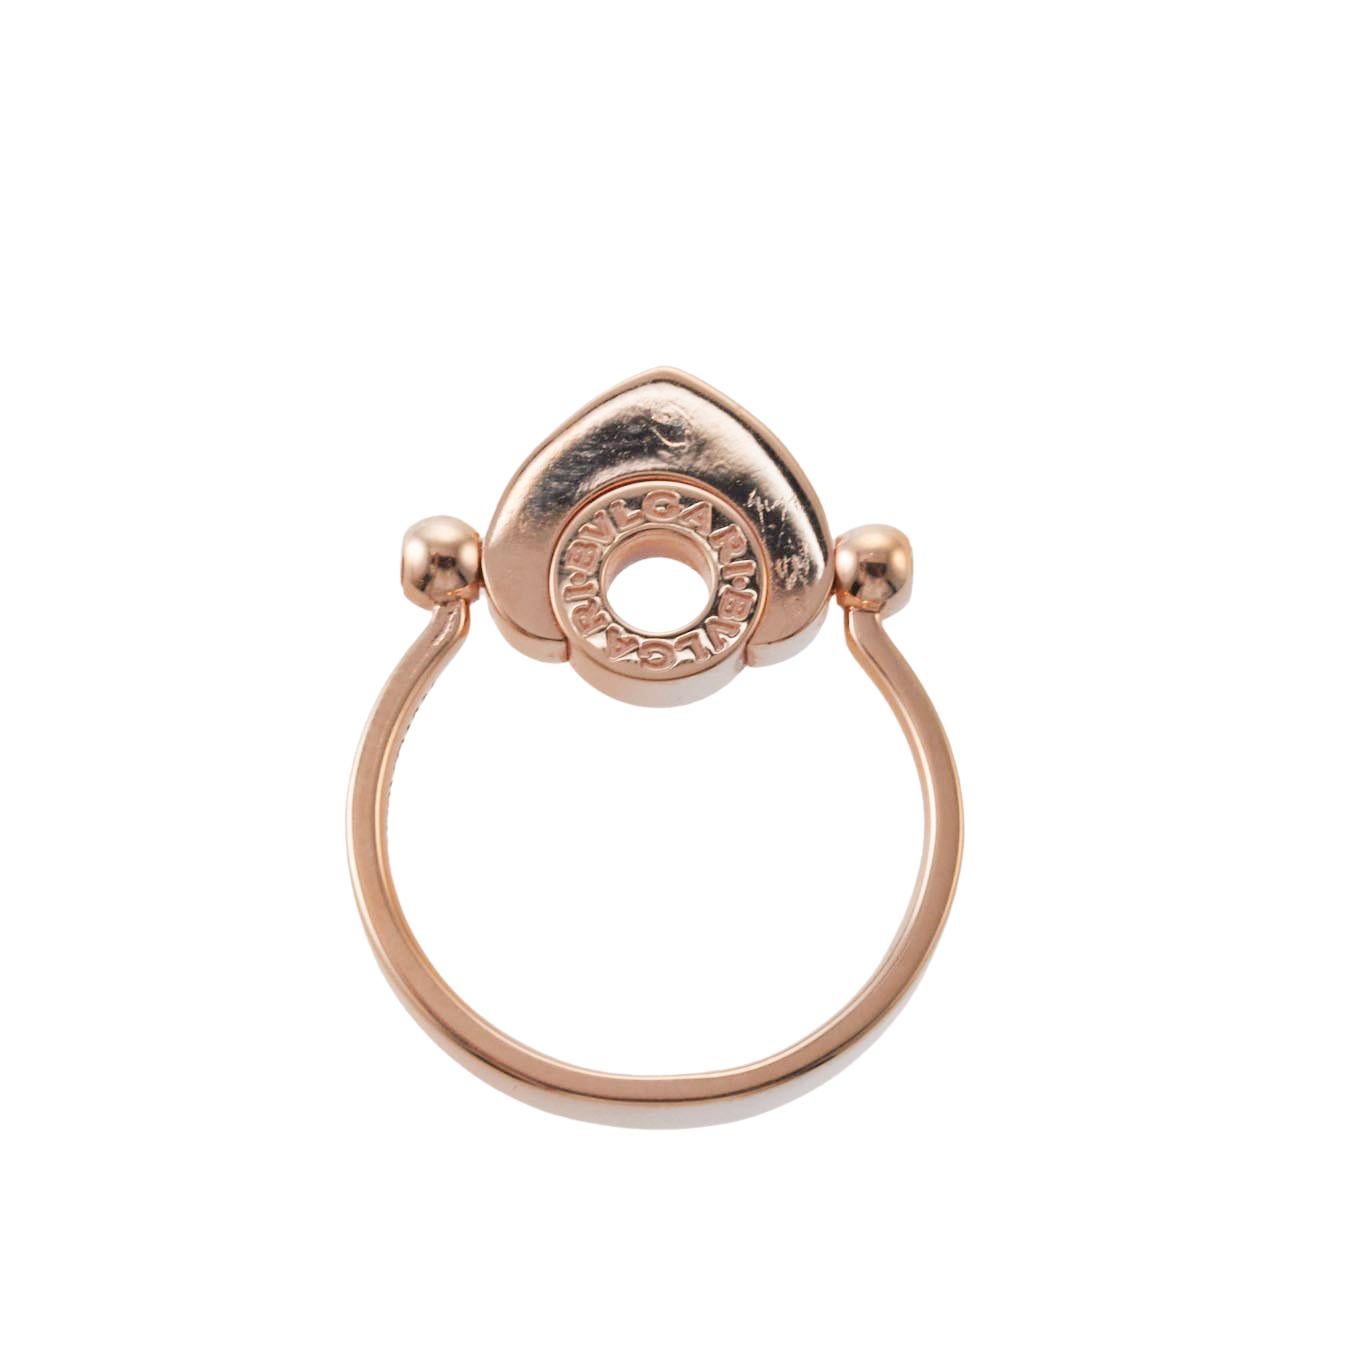 18k rose gold mother of pearl heart flip ring by Bvlgari. Top of the ring measures 17mm x 12mm, Ring comes in following sizes: 52; 53; 55. Marked: AU 750, Made in Italy, Bvlgari, Size and Serial Number. Weight is 5.0 grams. 